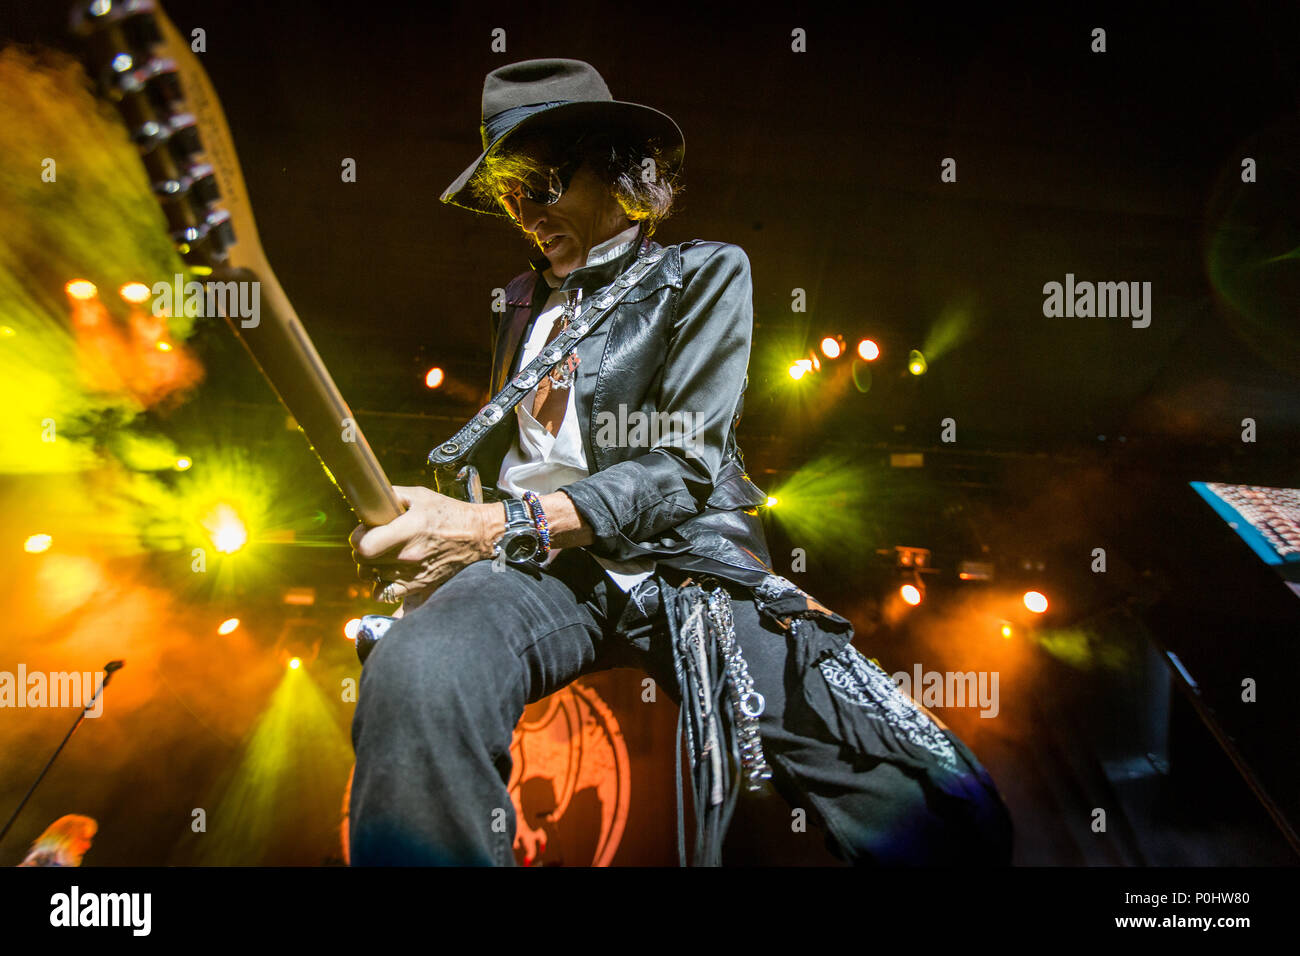 Denmark, Copenhagen - June 8, 2018. The American rock band Hollywood  Vampires performs a live concert during Fredagsrock in Tivoli Copenhagen.  Here guitarist Joe Perry is seen live on stage. (Photo credit: